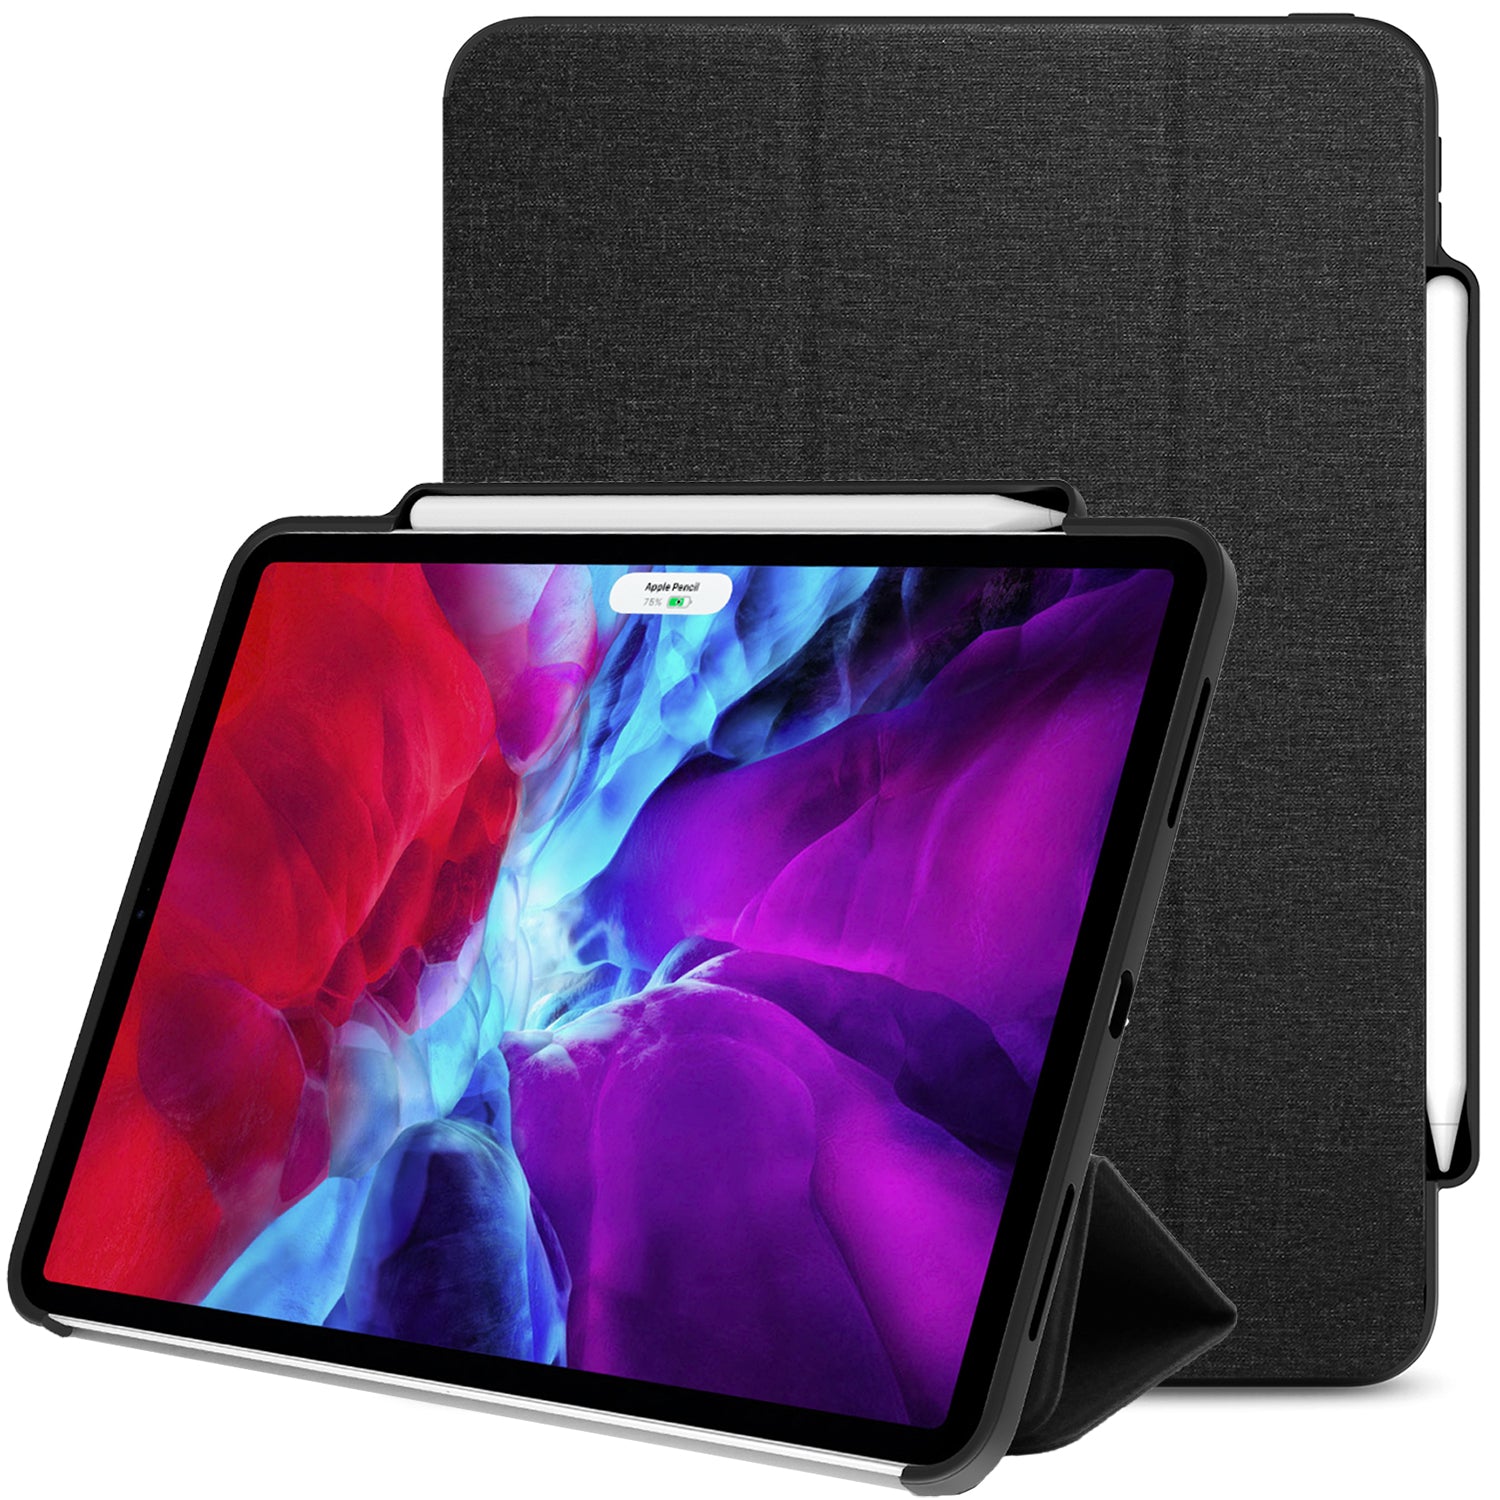 ProofTech iPad Pro 11 Case Front and Back Cover with Wireless Pencil Holder 2020